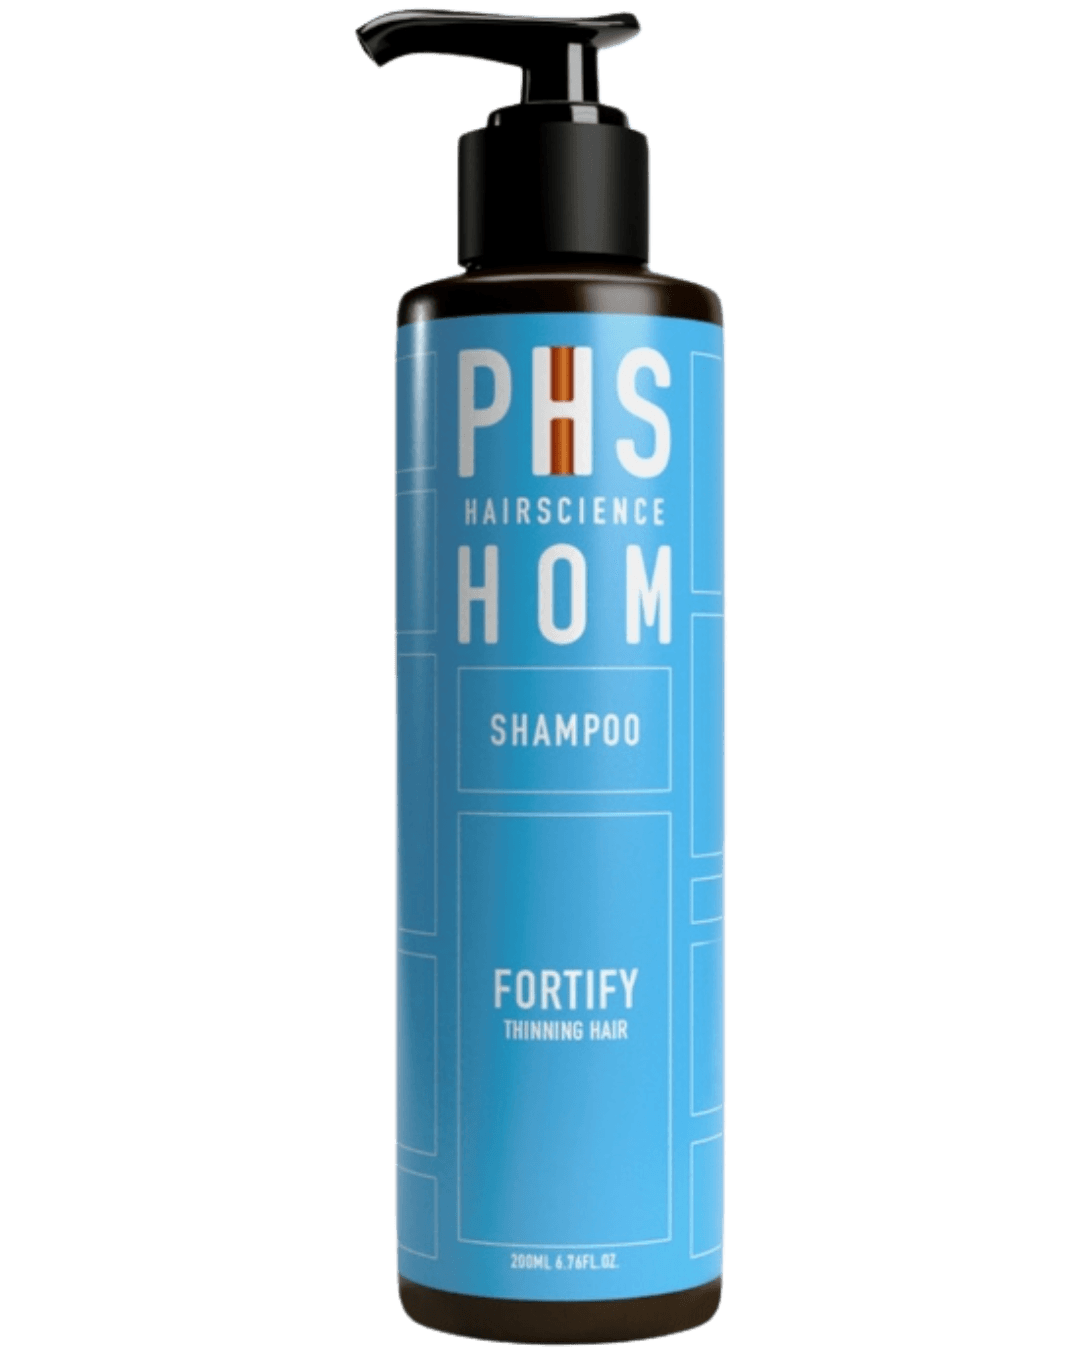 Daily Vanity Beauty Awards 2024 Best Mens care PHS HAIRSCIENCE Hairscience HOM Fortify Shampoo Voted By Beauty Experts